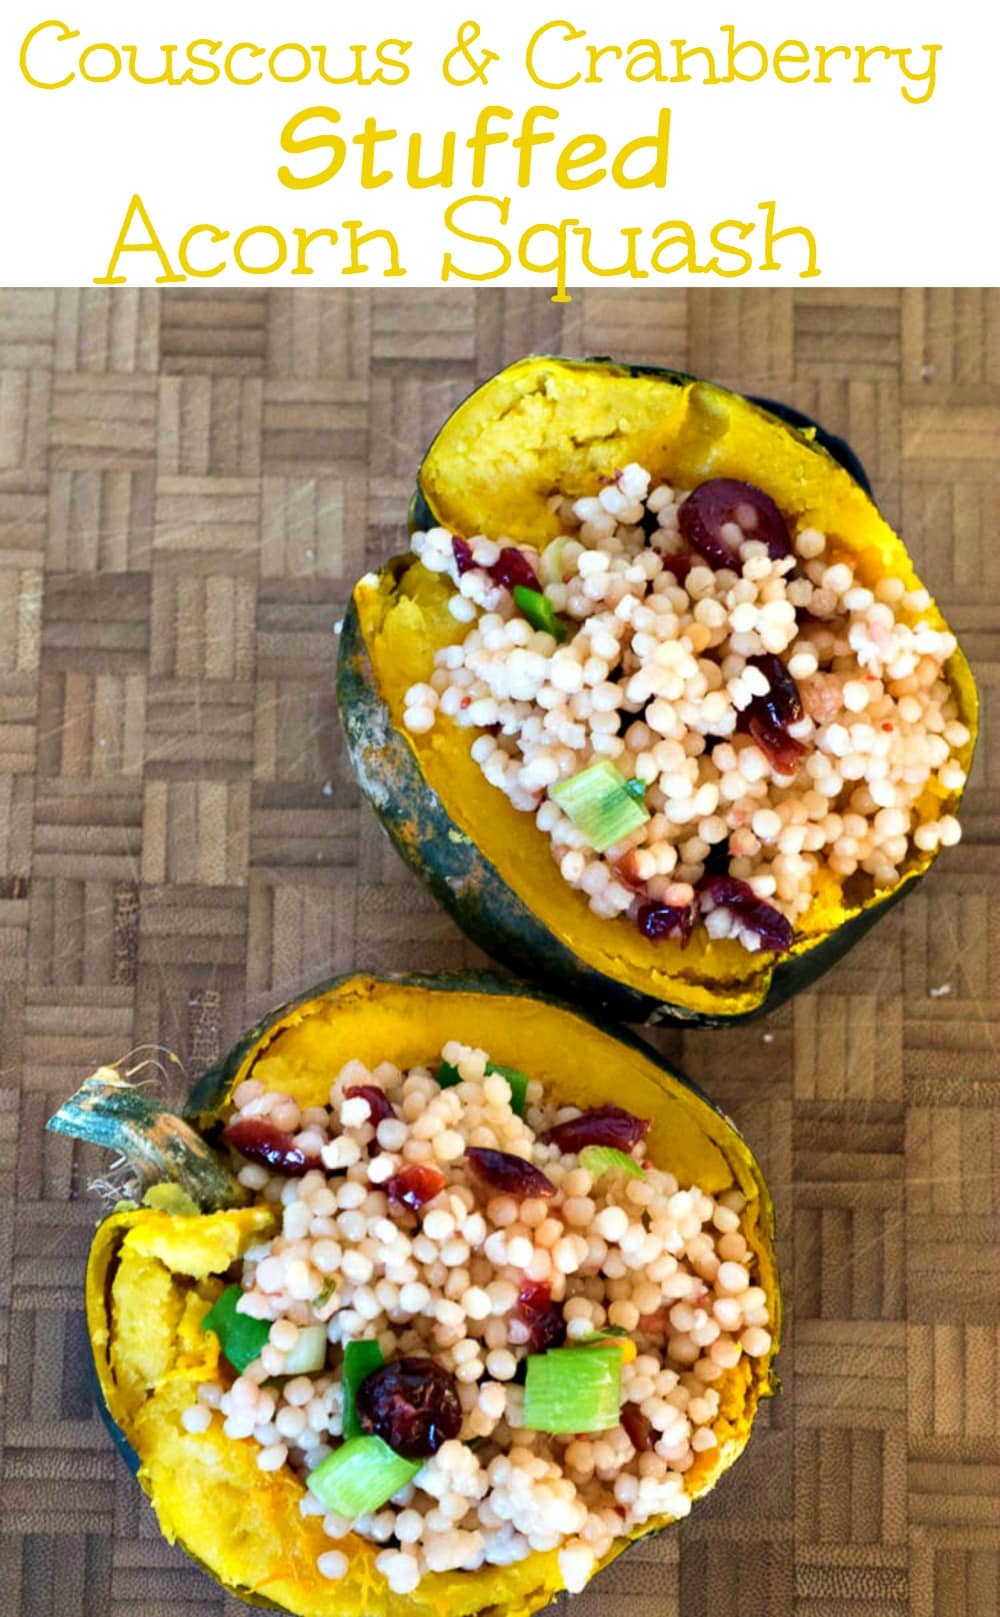 Couscous and Cranberry Stuffed Acorn Squash - and easy seasonal fall meal